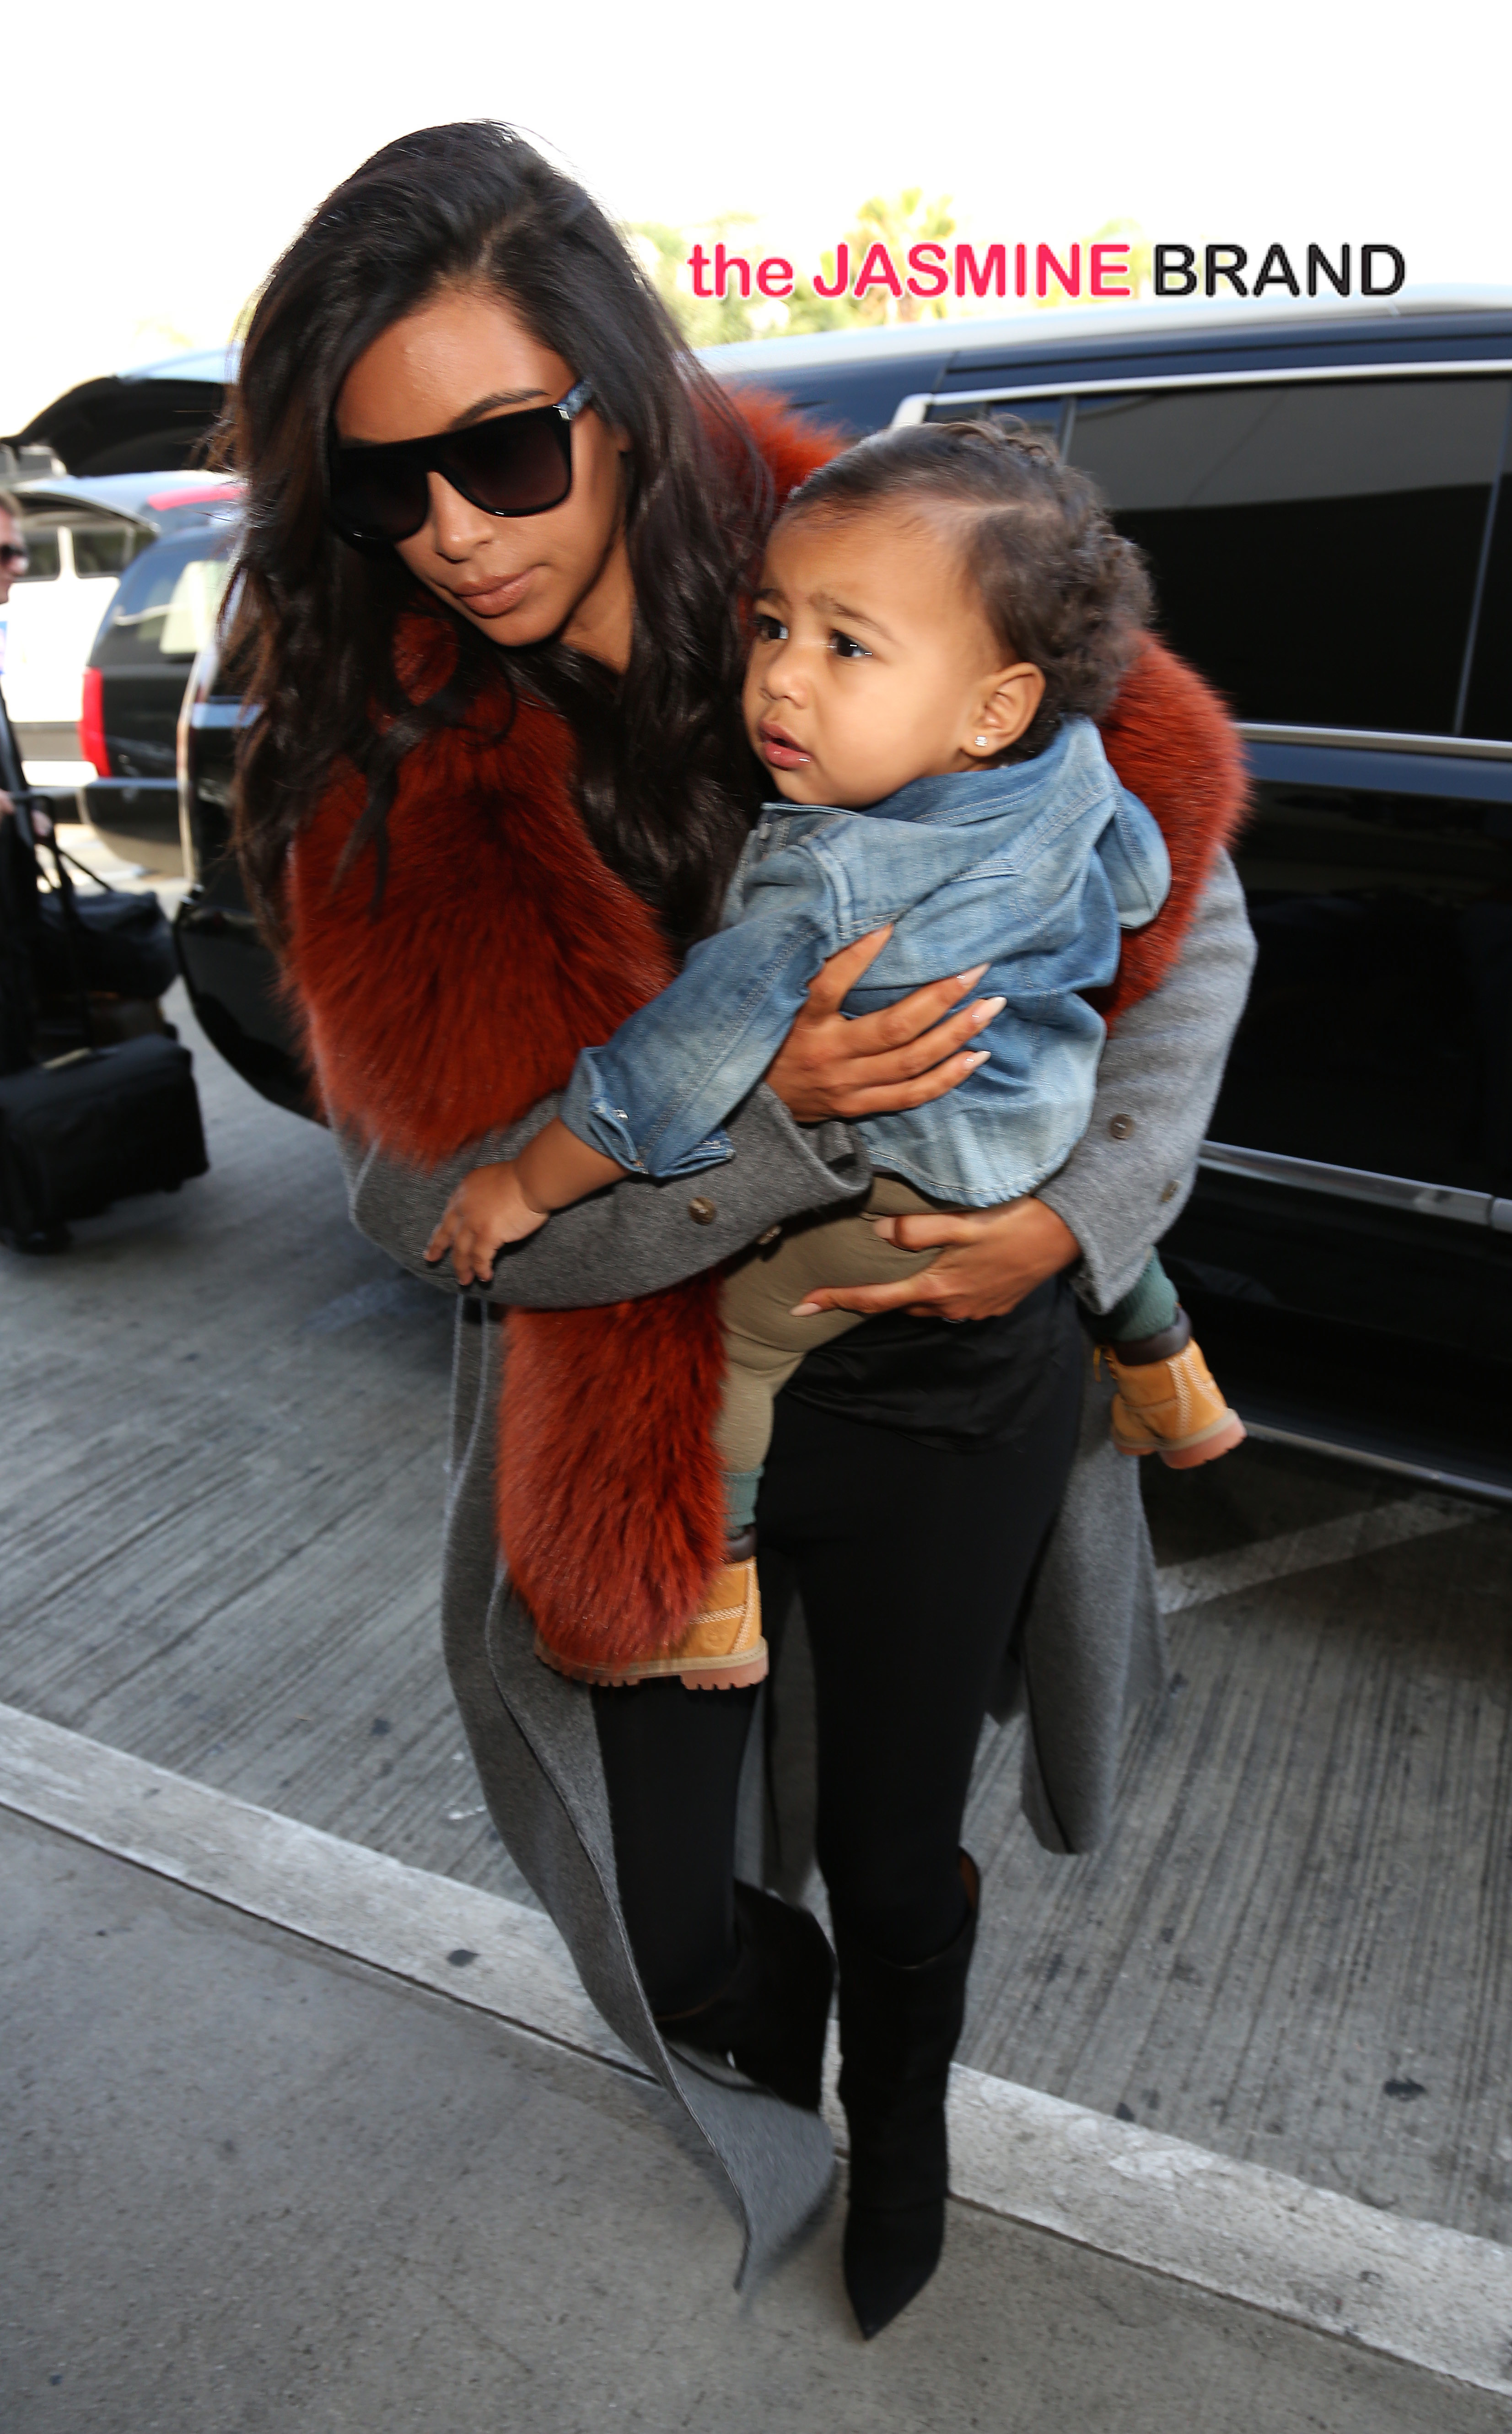 Kim Kardashian and baby North leaving LAX Airport, Kim Was in a long coat